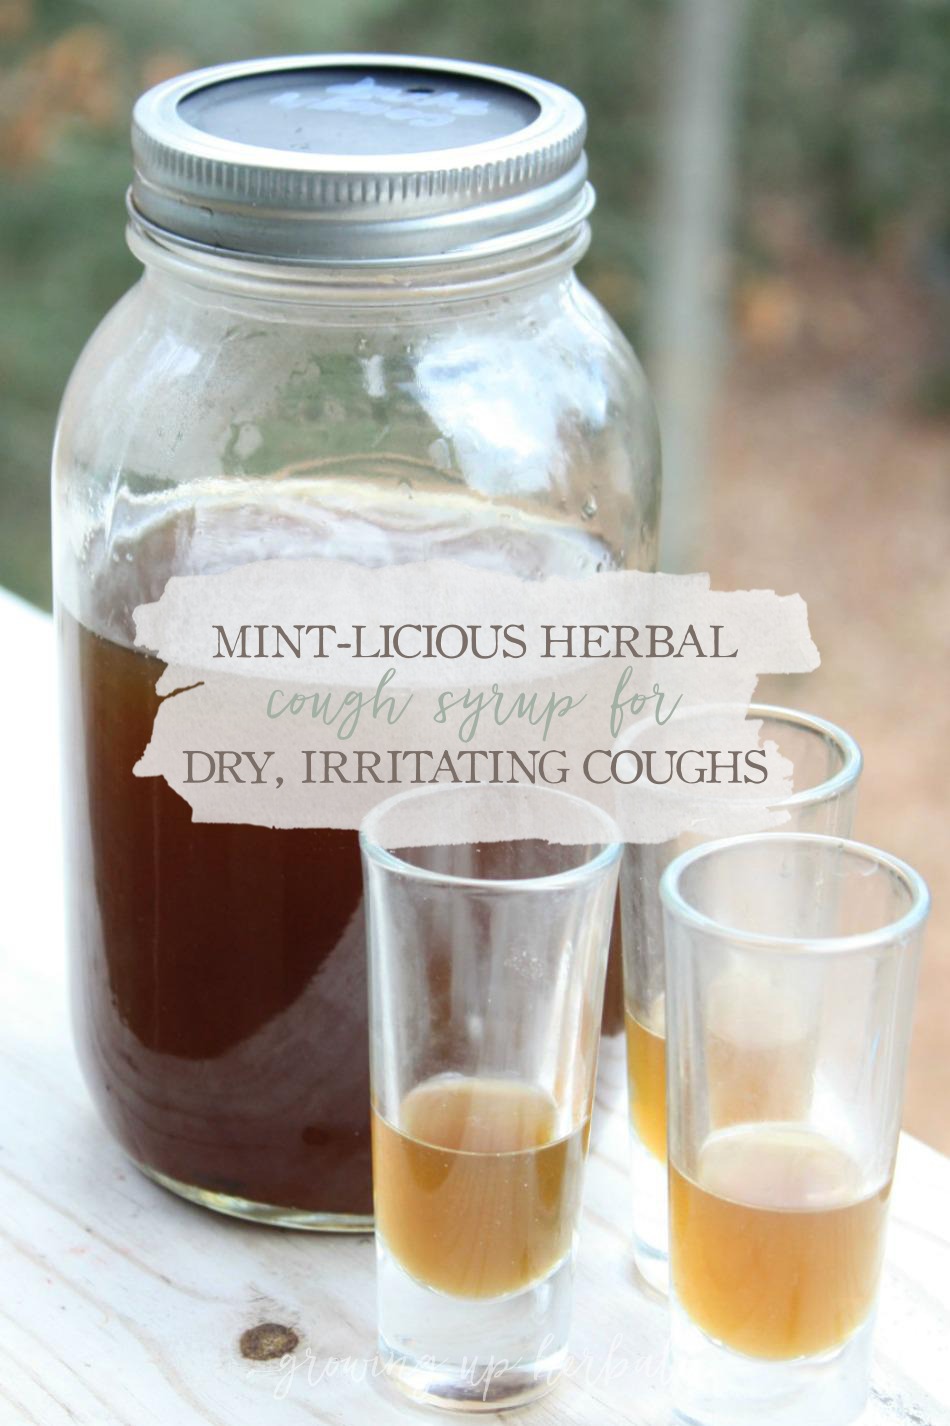 Mint-licious Herbal Cough Syrup Recipe | Growing Up Herbal | A minty herbal cough syrup for dry, irritating coughs.